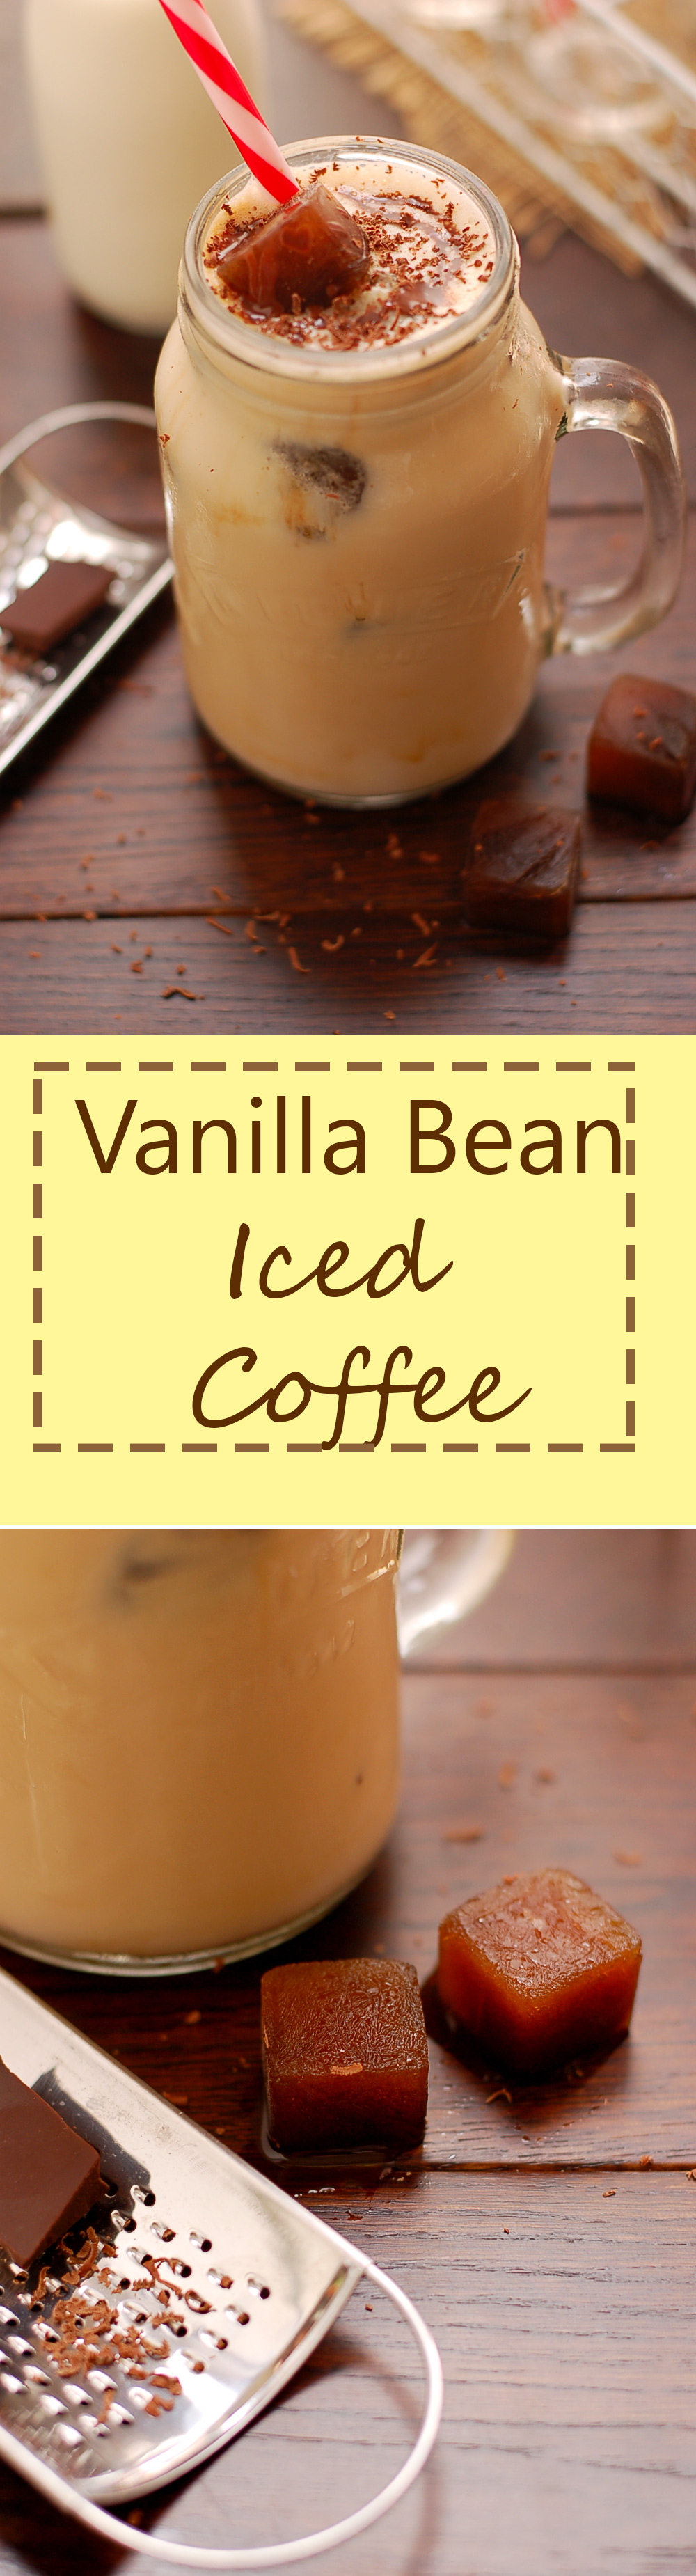 Yummy Vanilla Bean Iced Coffee. You will fall in love with it!